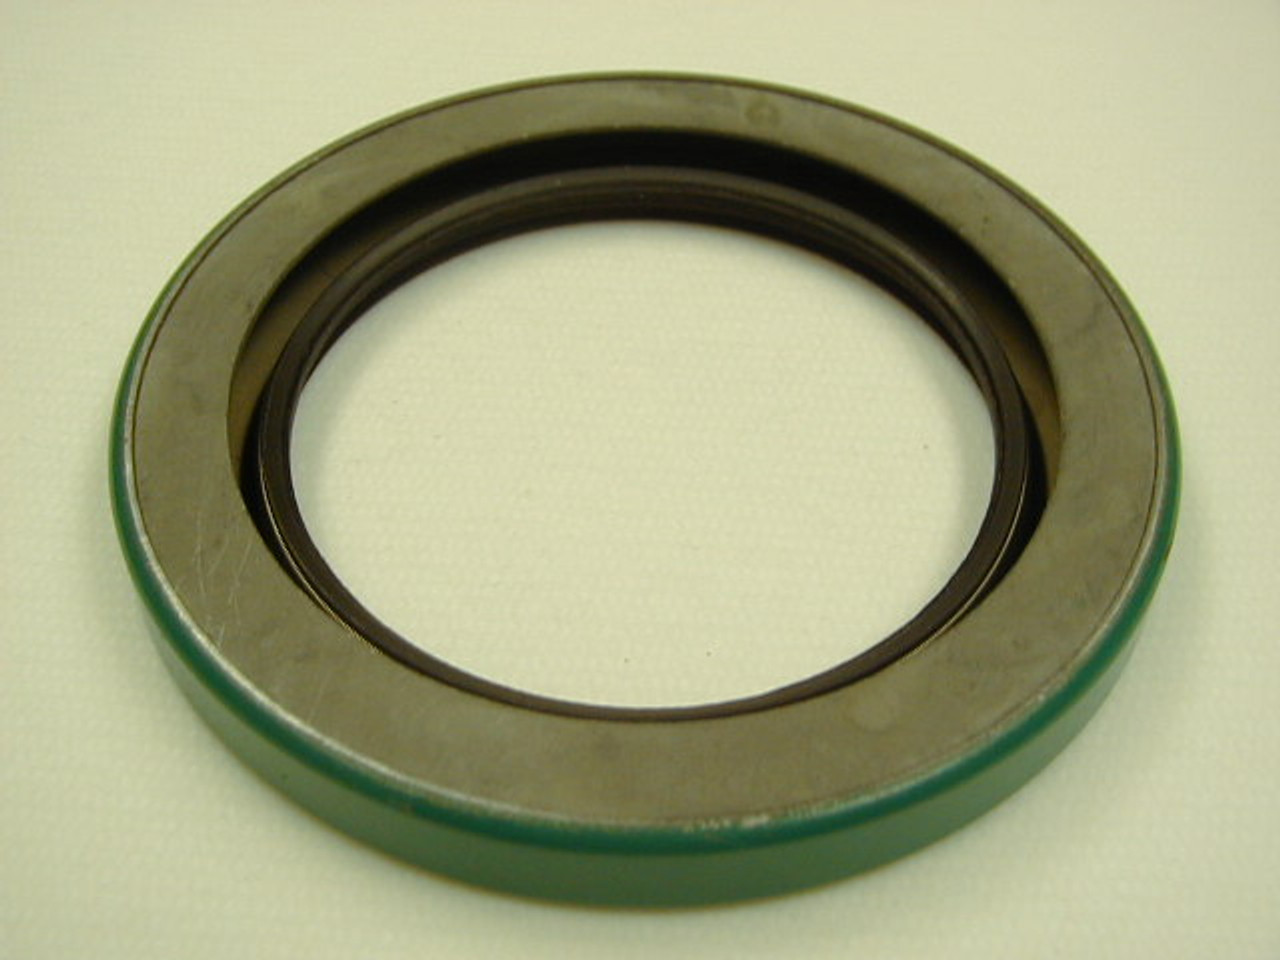 9.250" (234.95mm) Inch Reinforced Metal Double Lip Nitrile Oil Seal  92536 CRWHA1 R